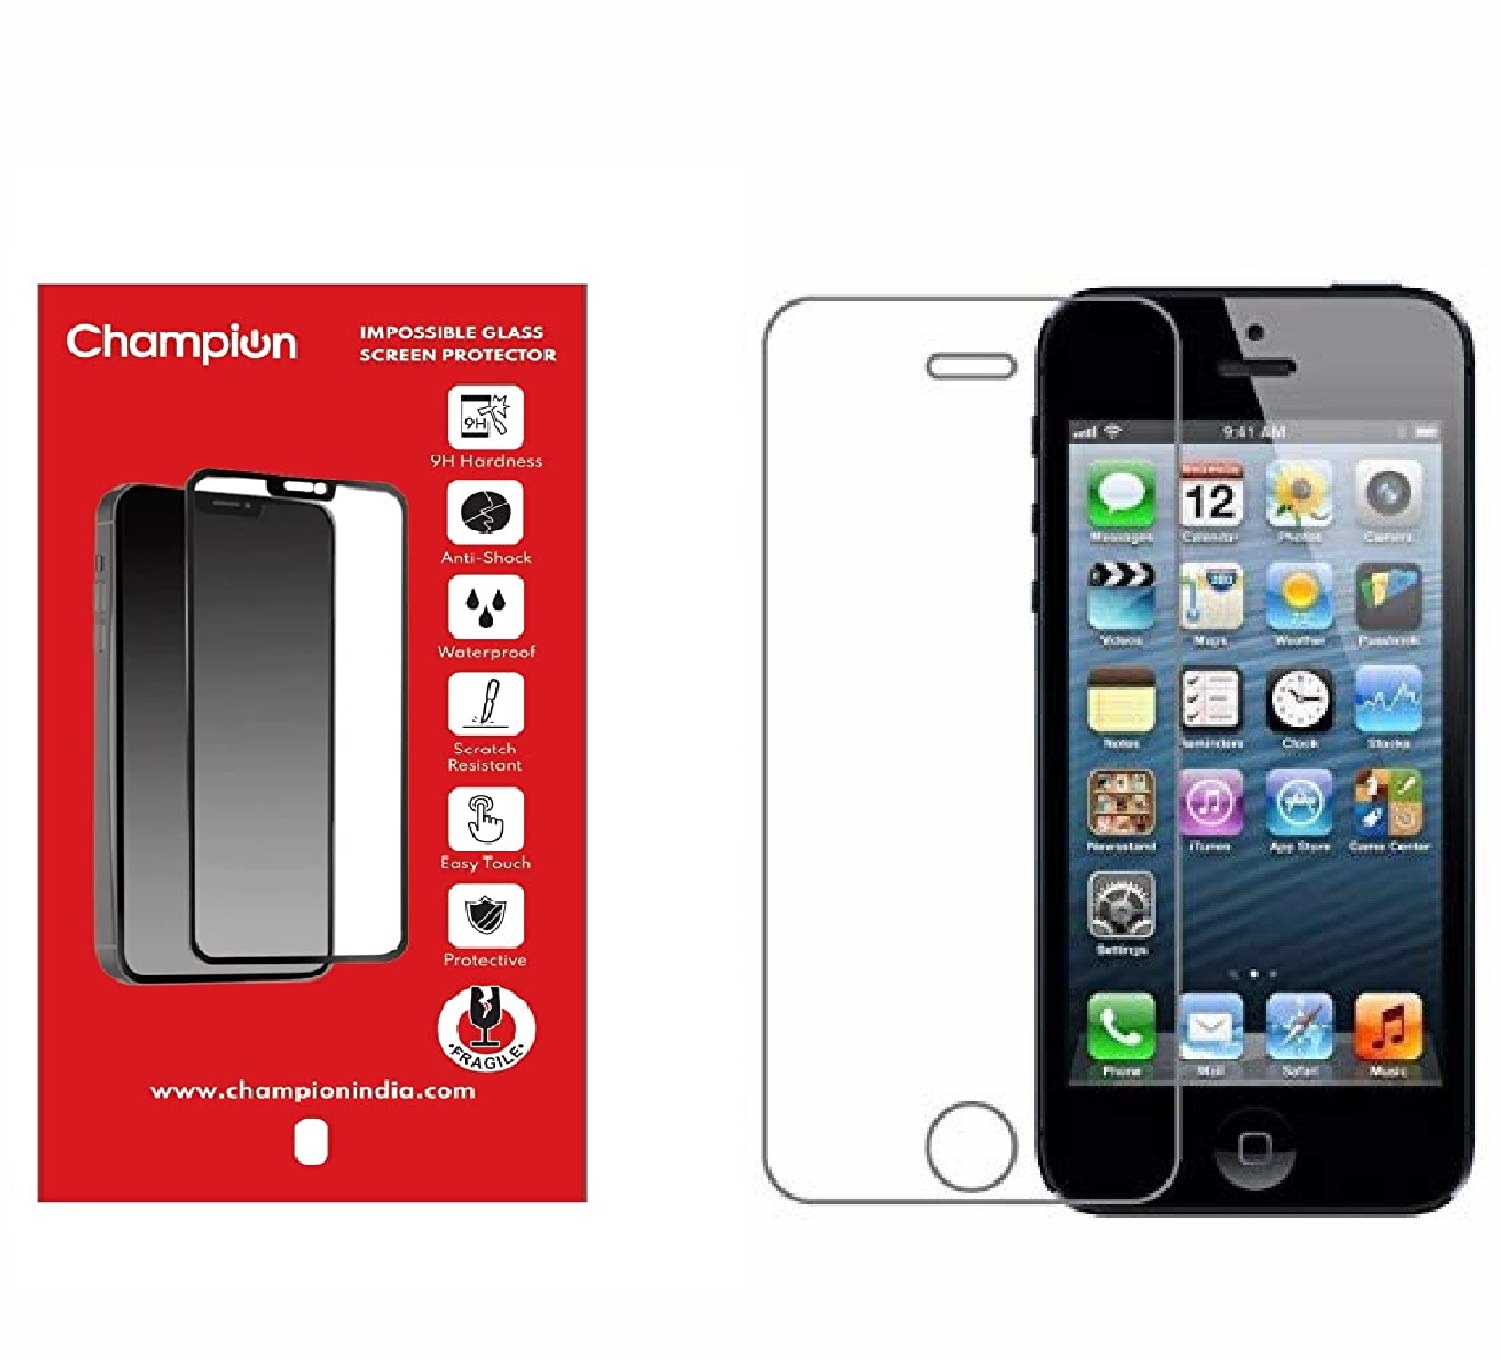 iPhone 4/4S Premium Tempered Glass Screen Protector Slim 9H Hardness 2.5D